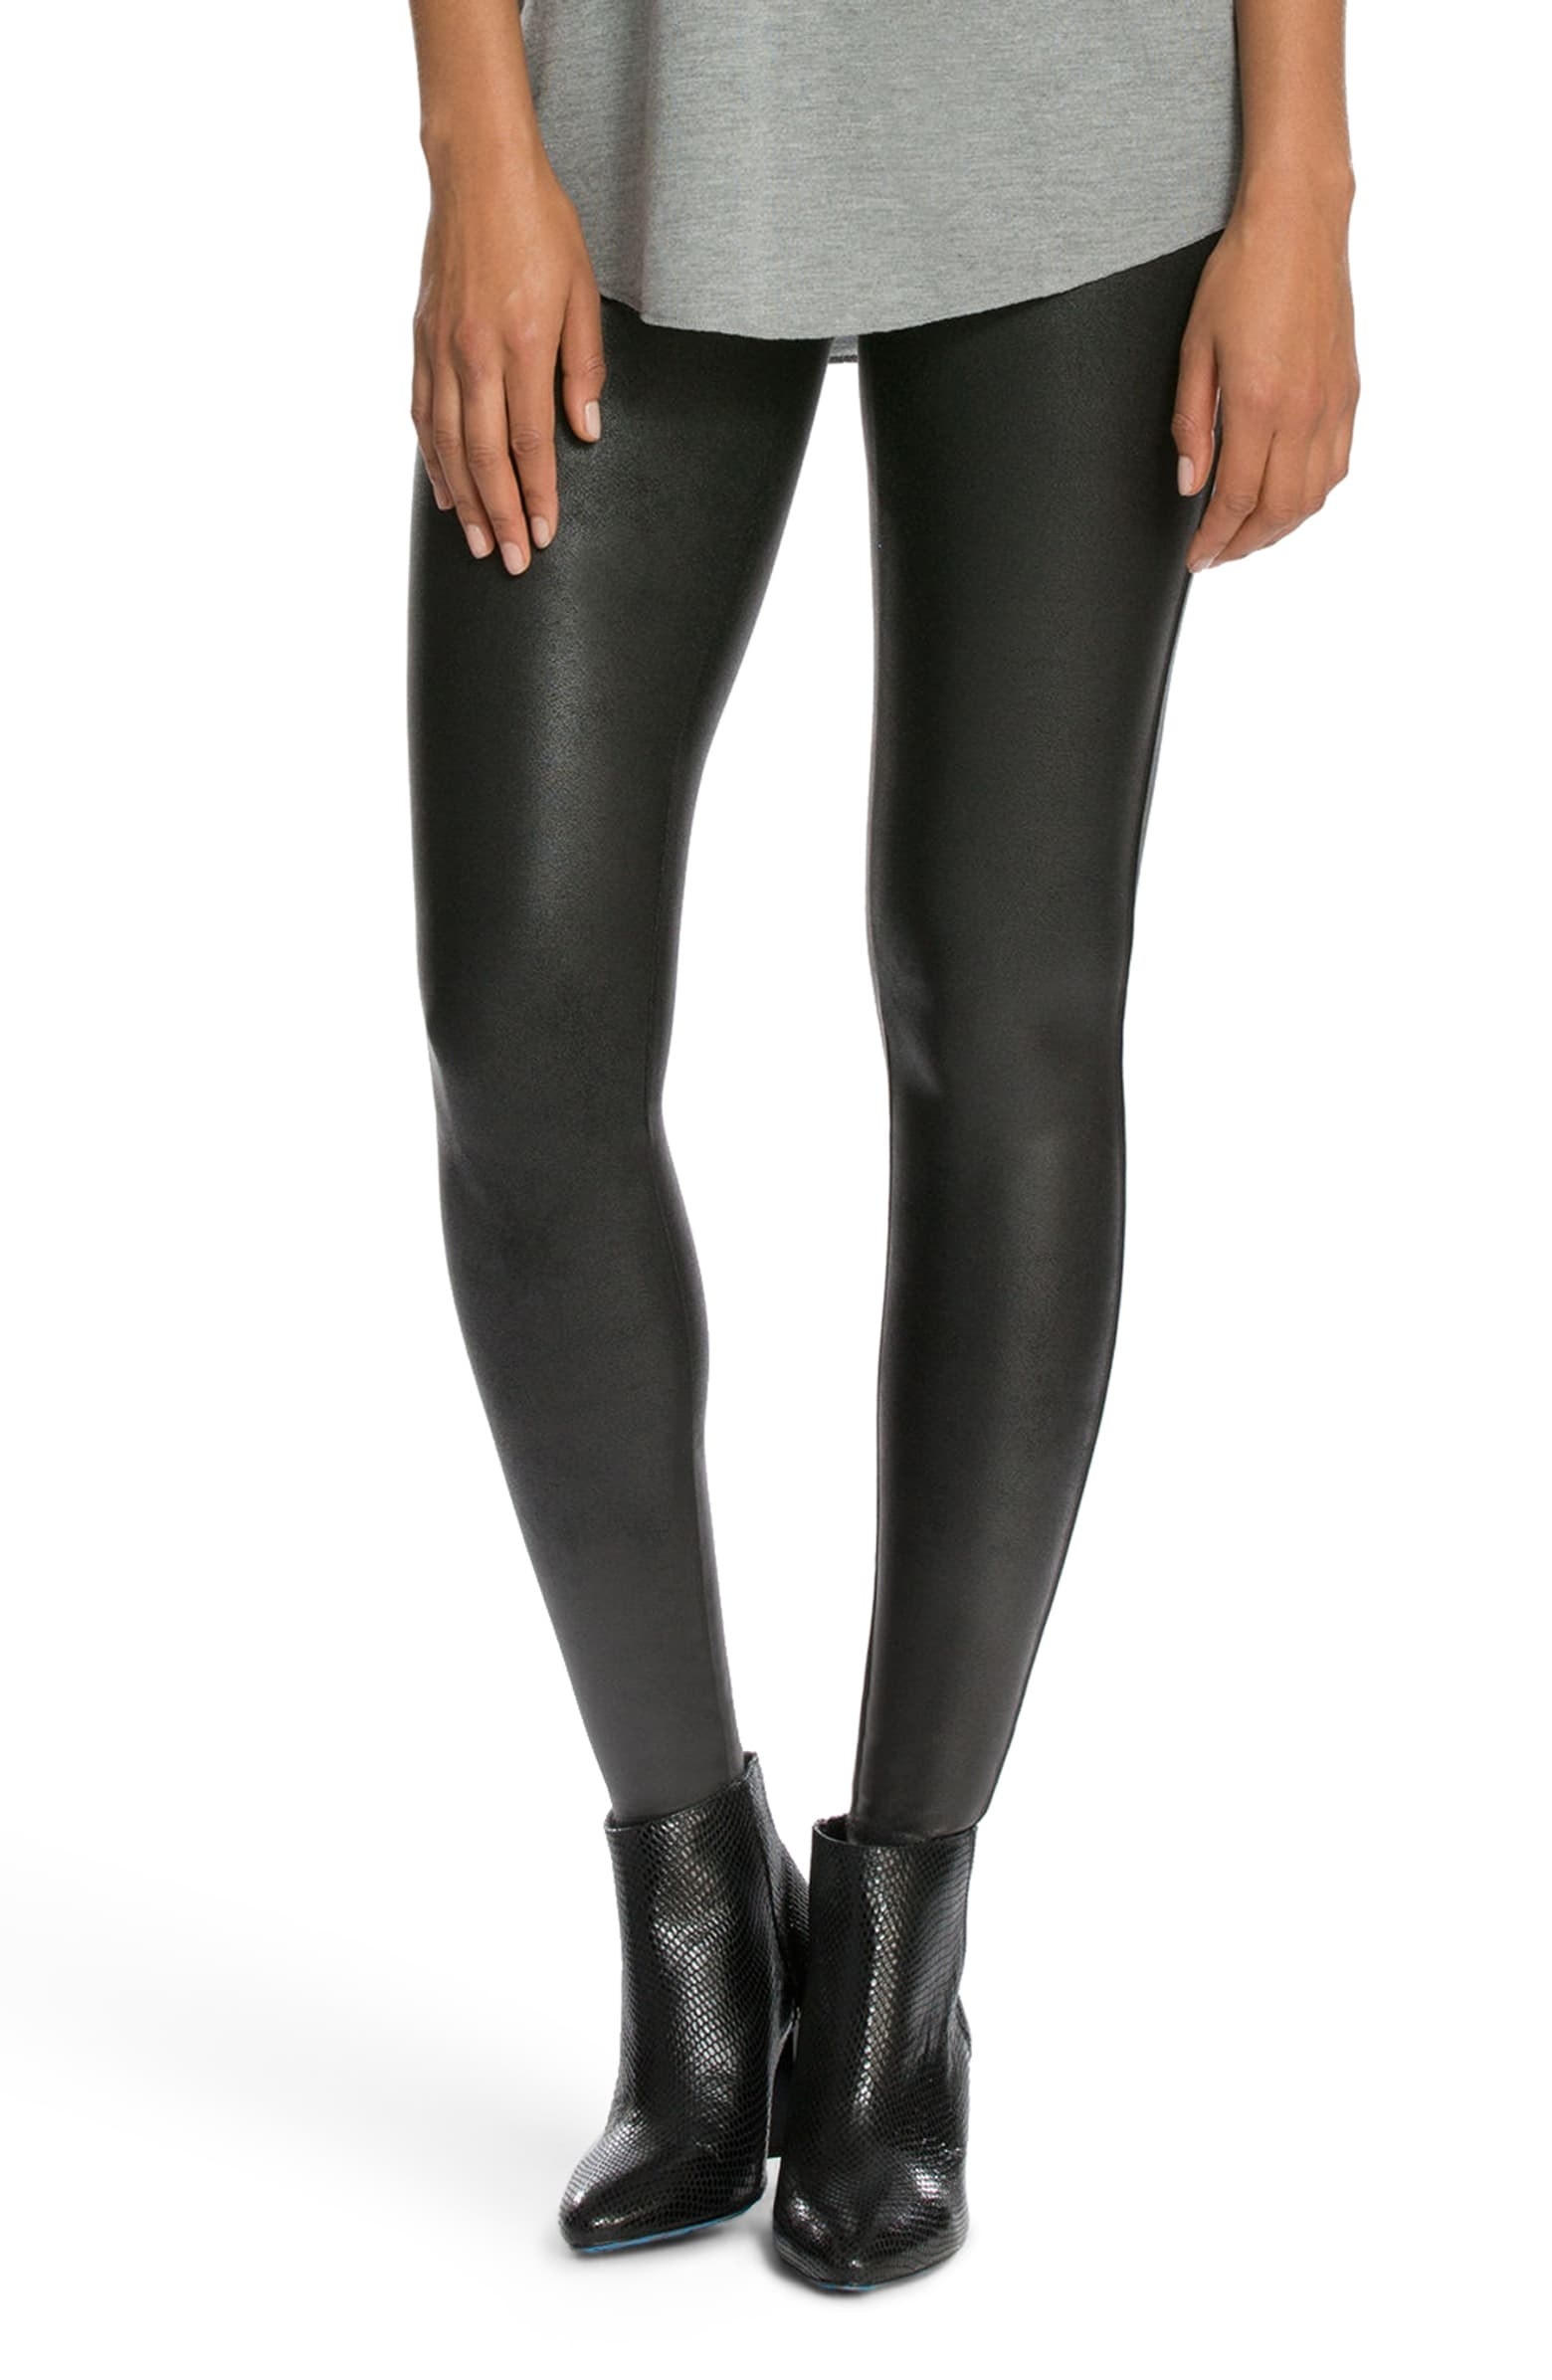 a model in the black faux leather leggings with booties